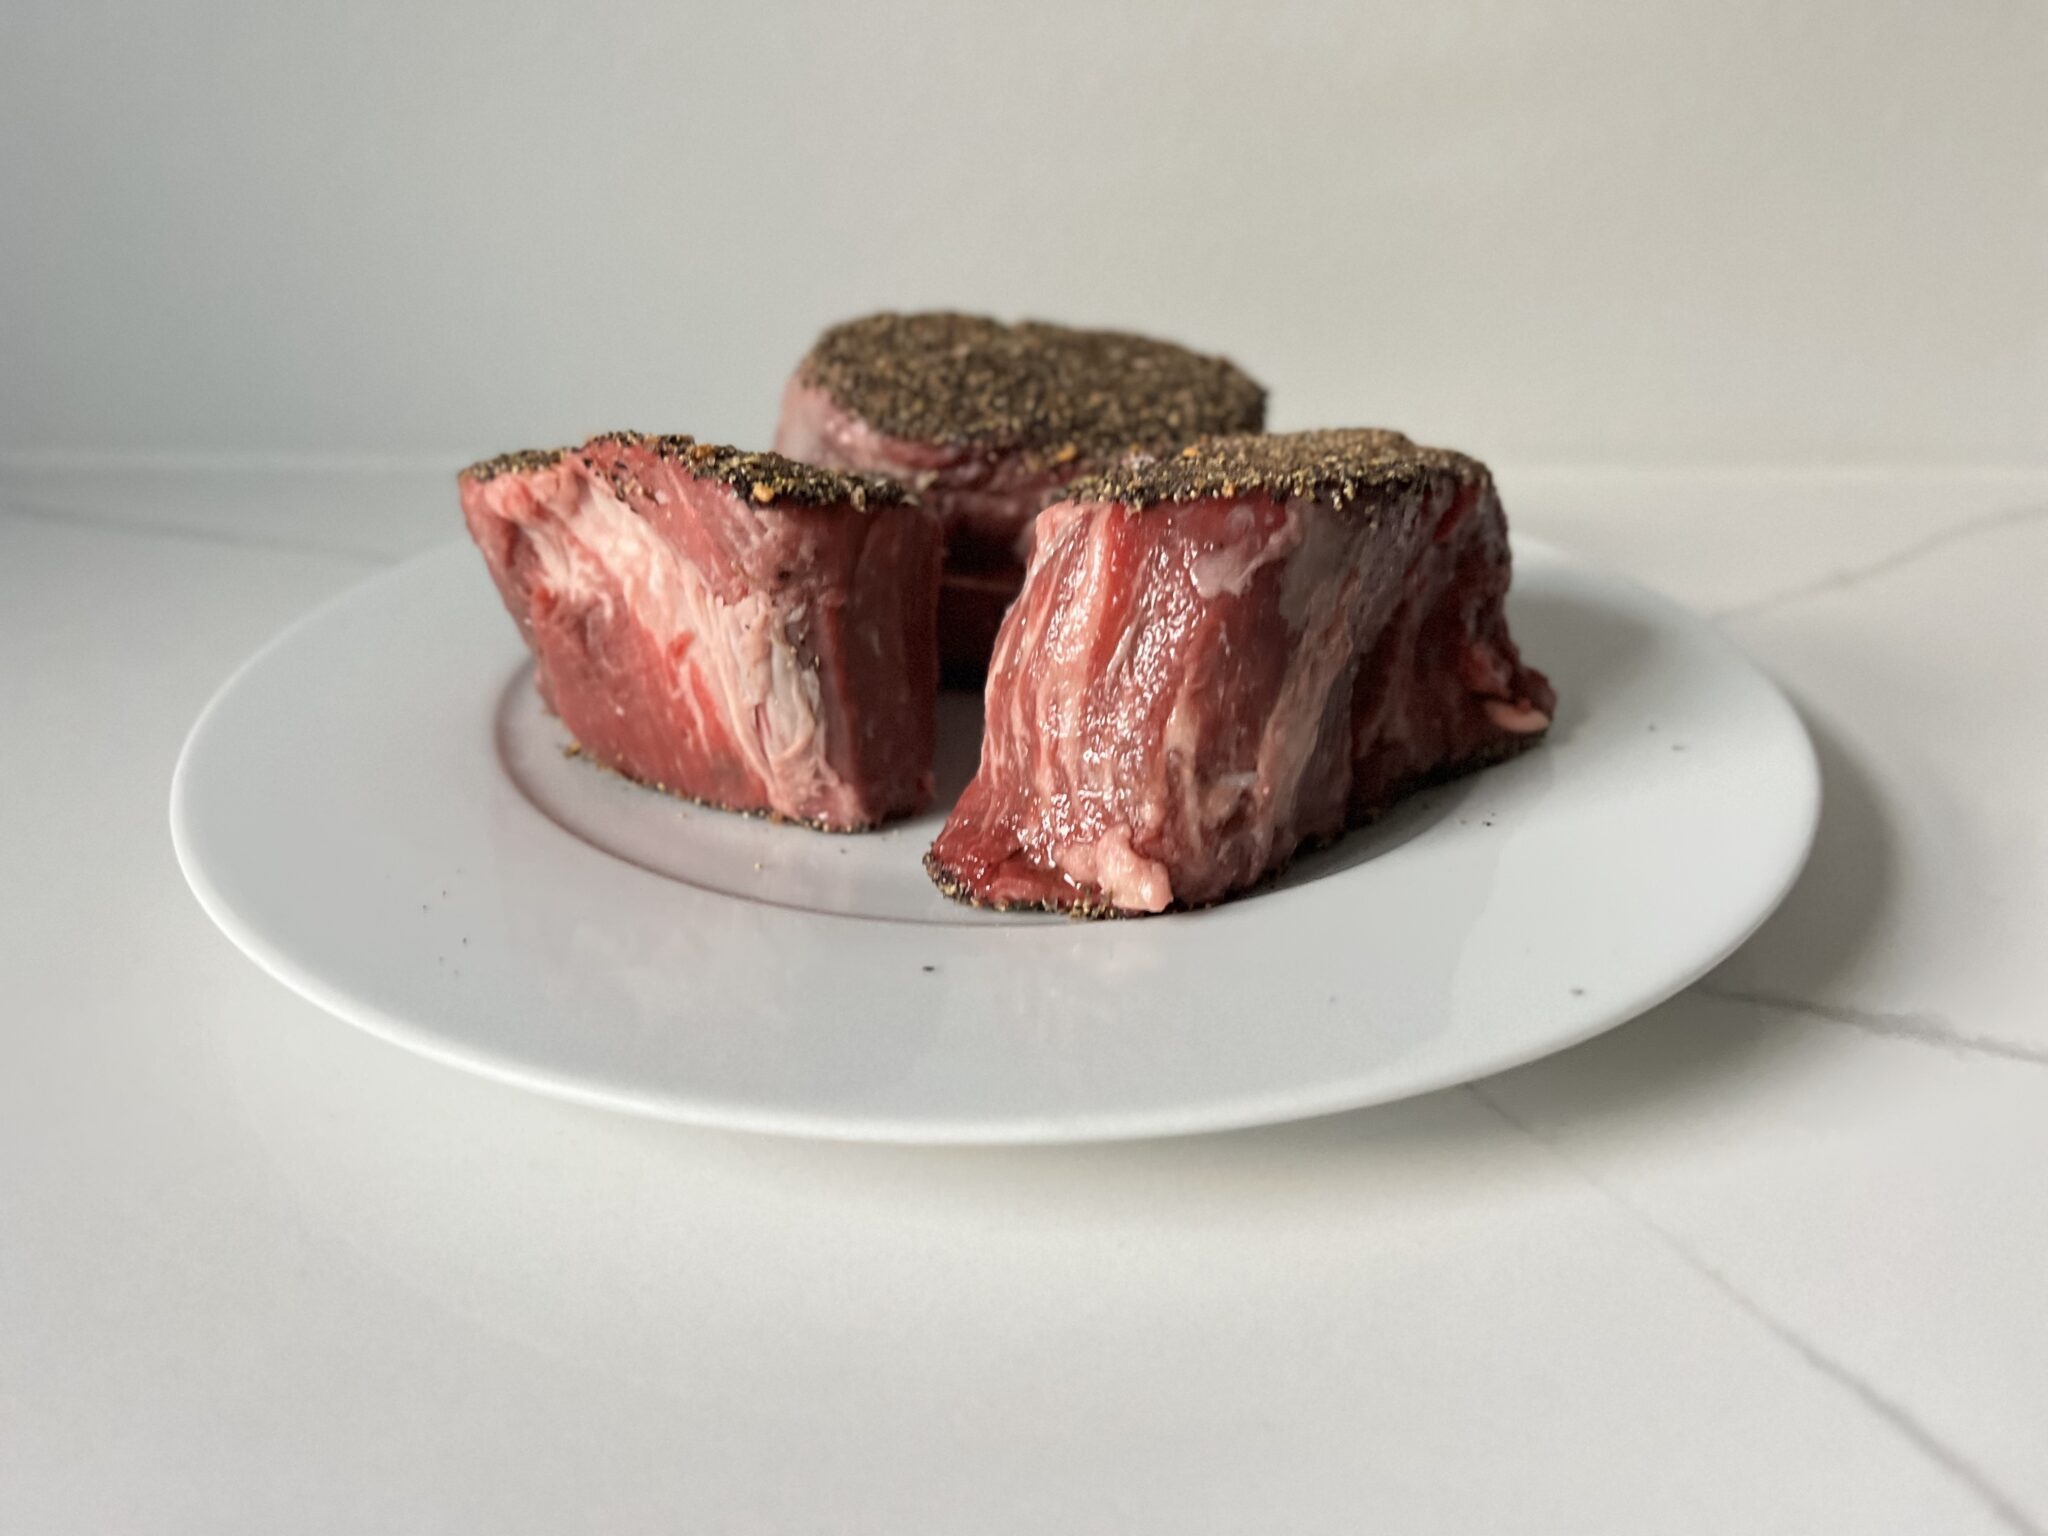 3 raw filet mignon steaks seasoned with salt and pepper